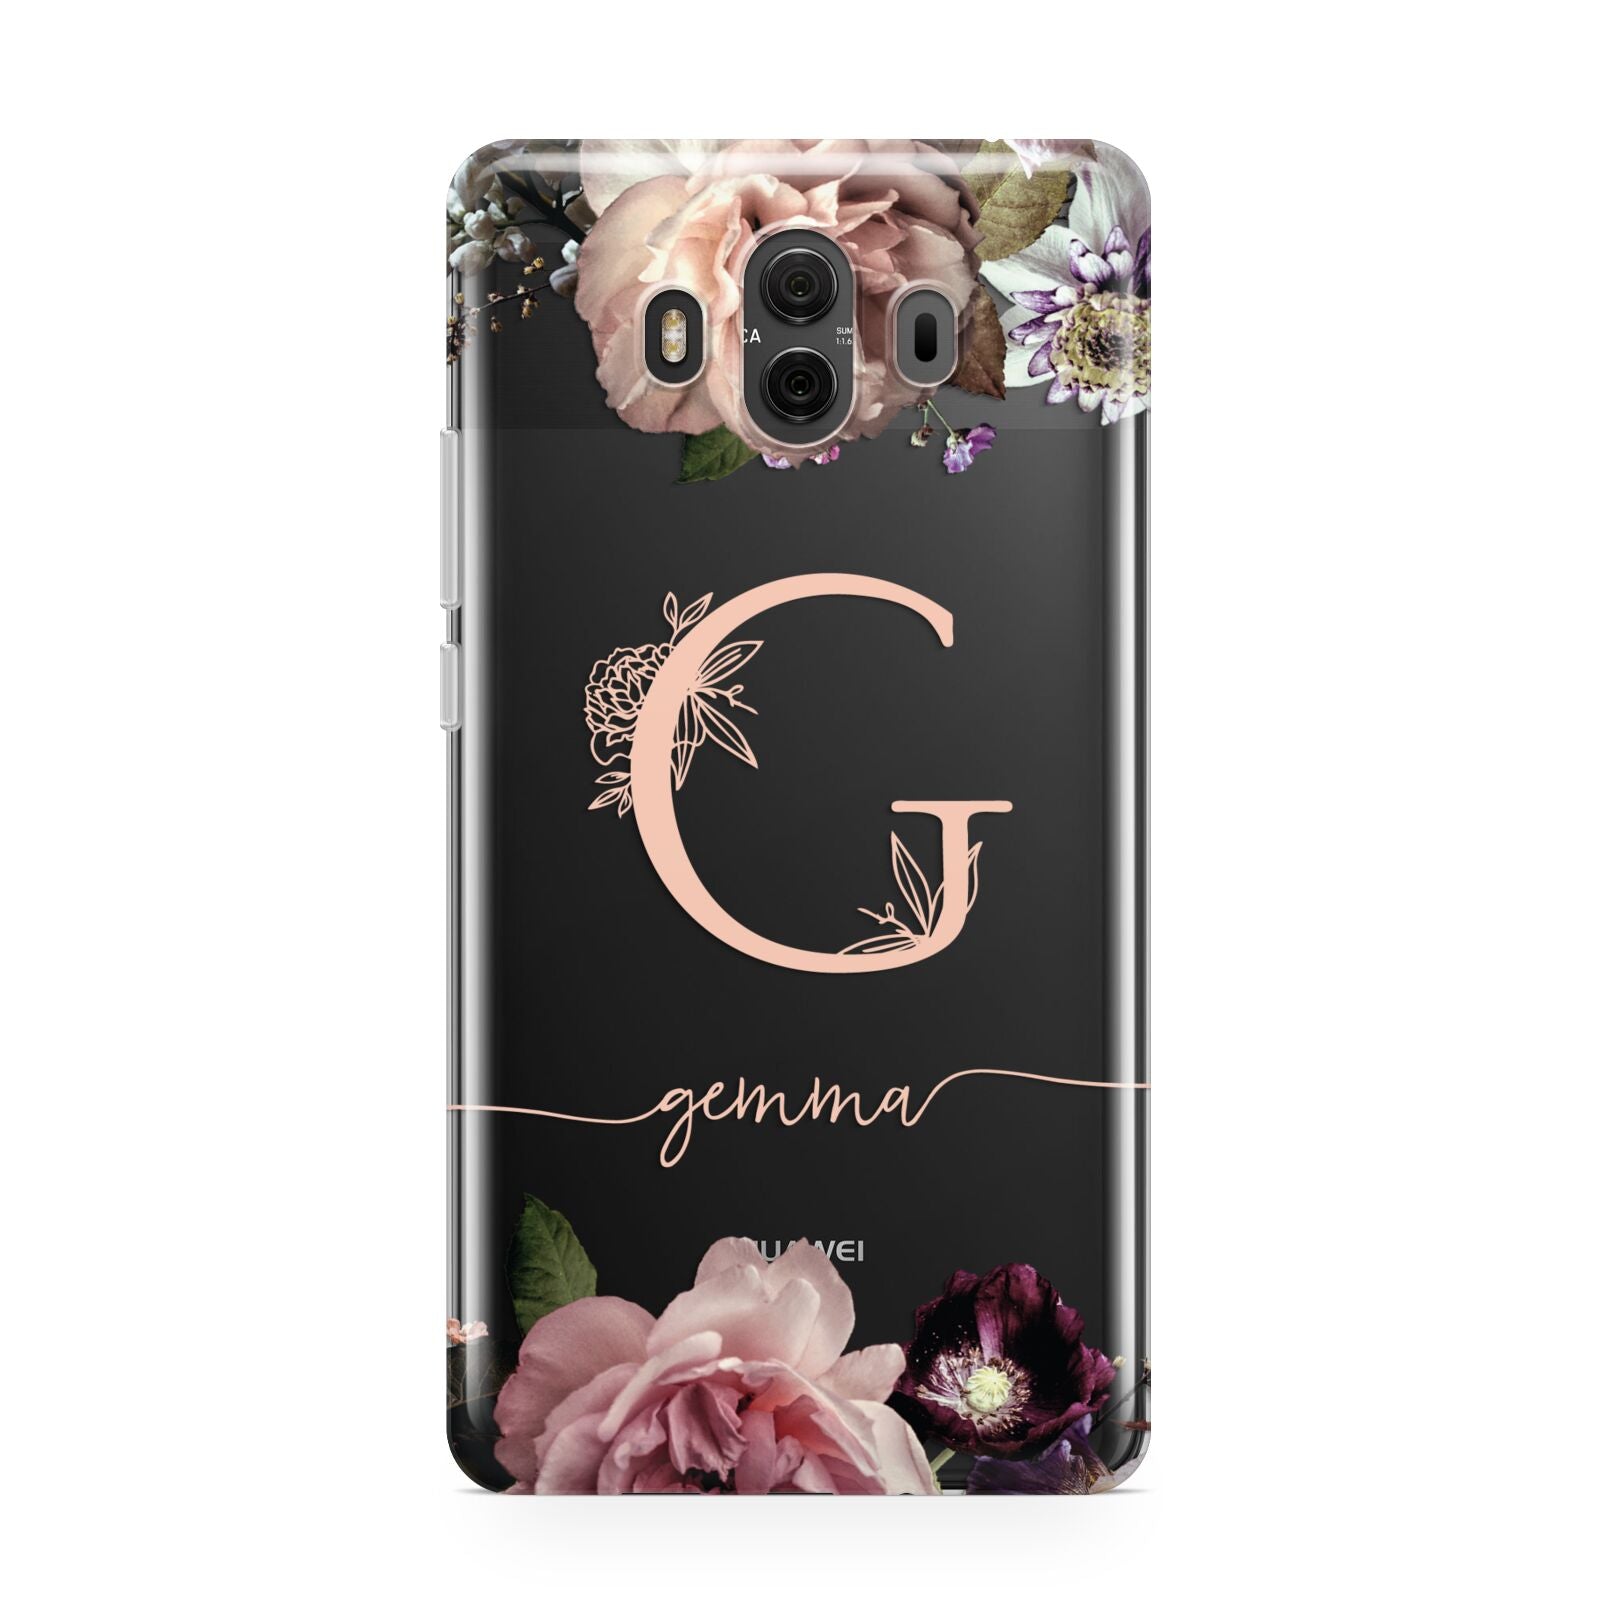 Vintage Floral Personalised Huawei Mate 10 Protective Phone Case